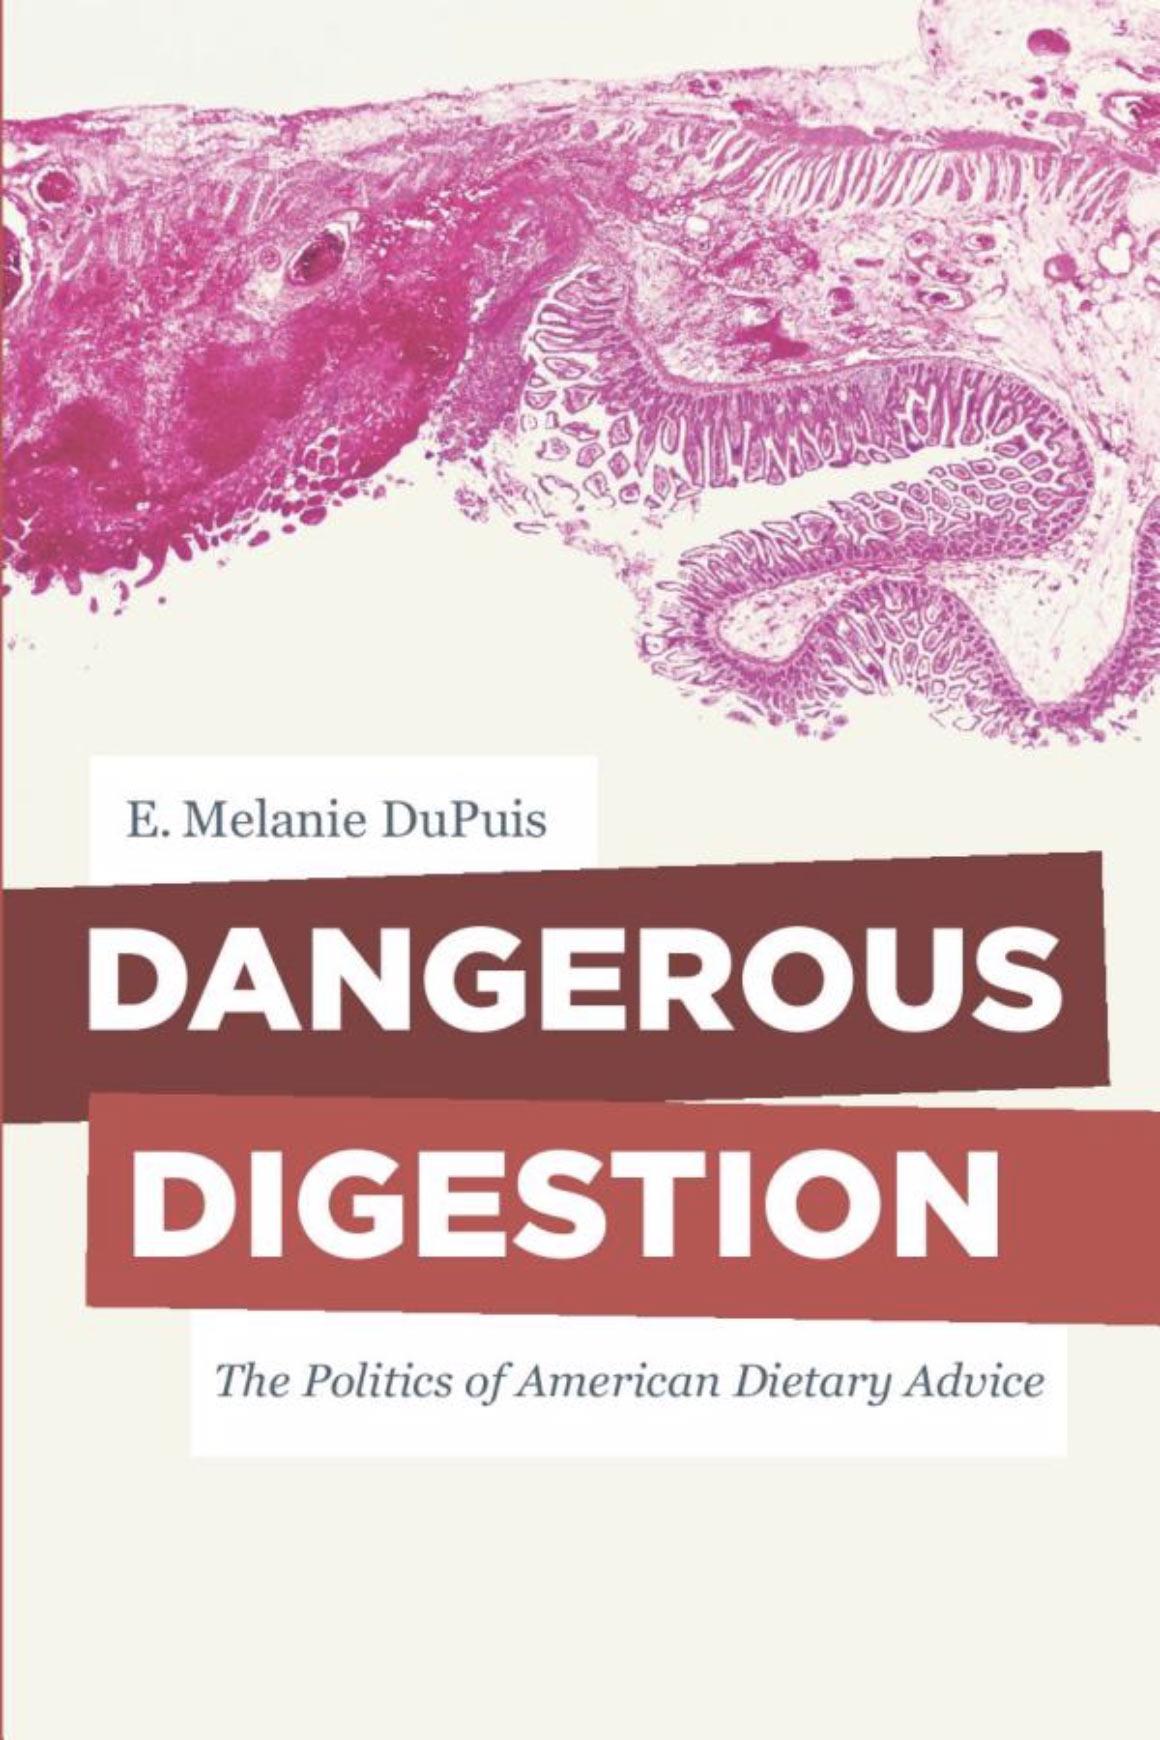 Dangerous Digestion: The Politics Of American Dietary Advice by E. Melanie Dupuis